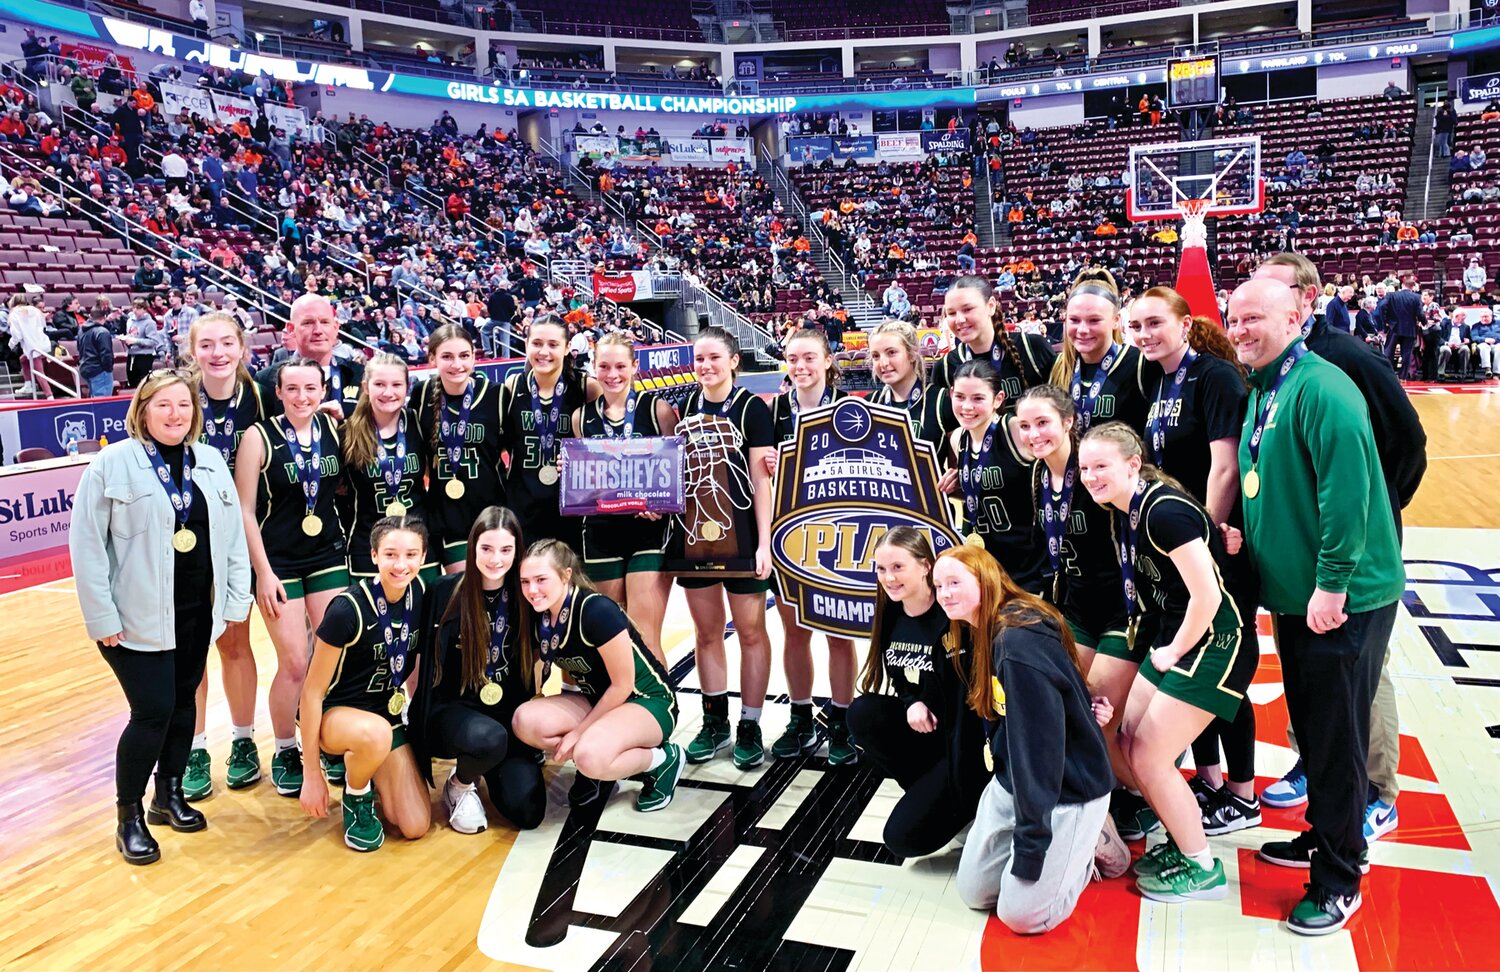 Archbishop Wood won its fourth straight state title – two at 4A and the last two at 5A – on Saturday in Hershey after topping Cathedral Prep 37-27. The Vikings notably beat eventual 6A champion Cardinal O’Hara 45-32 in January.